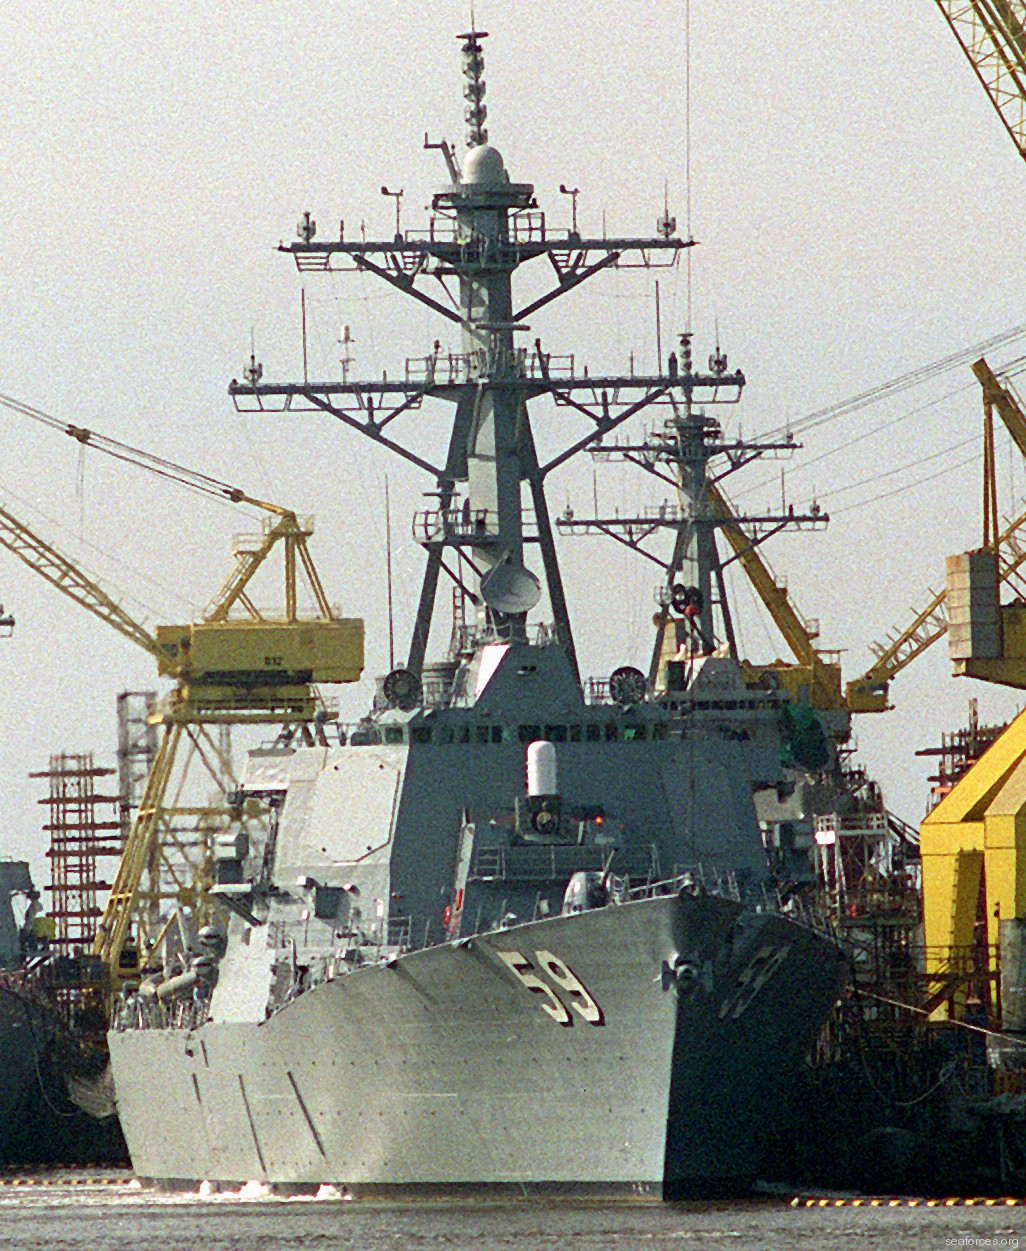 ddg-59 uss russell guided missile destroyer us navy 54 fitting out ingalls shipbuilding pascagoula mississippi